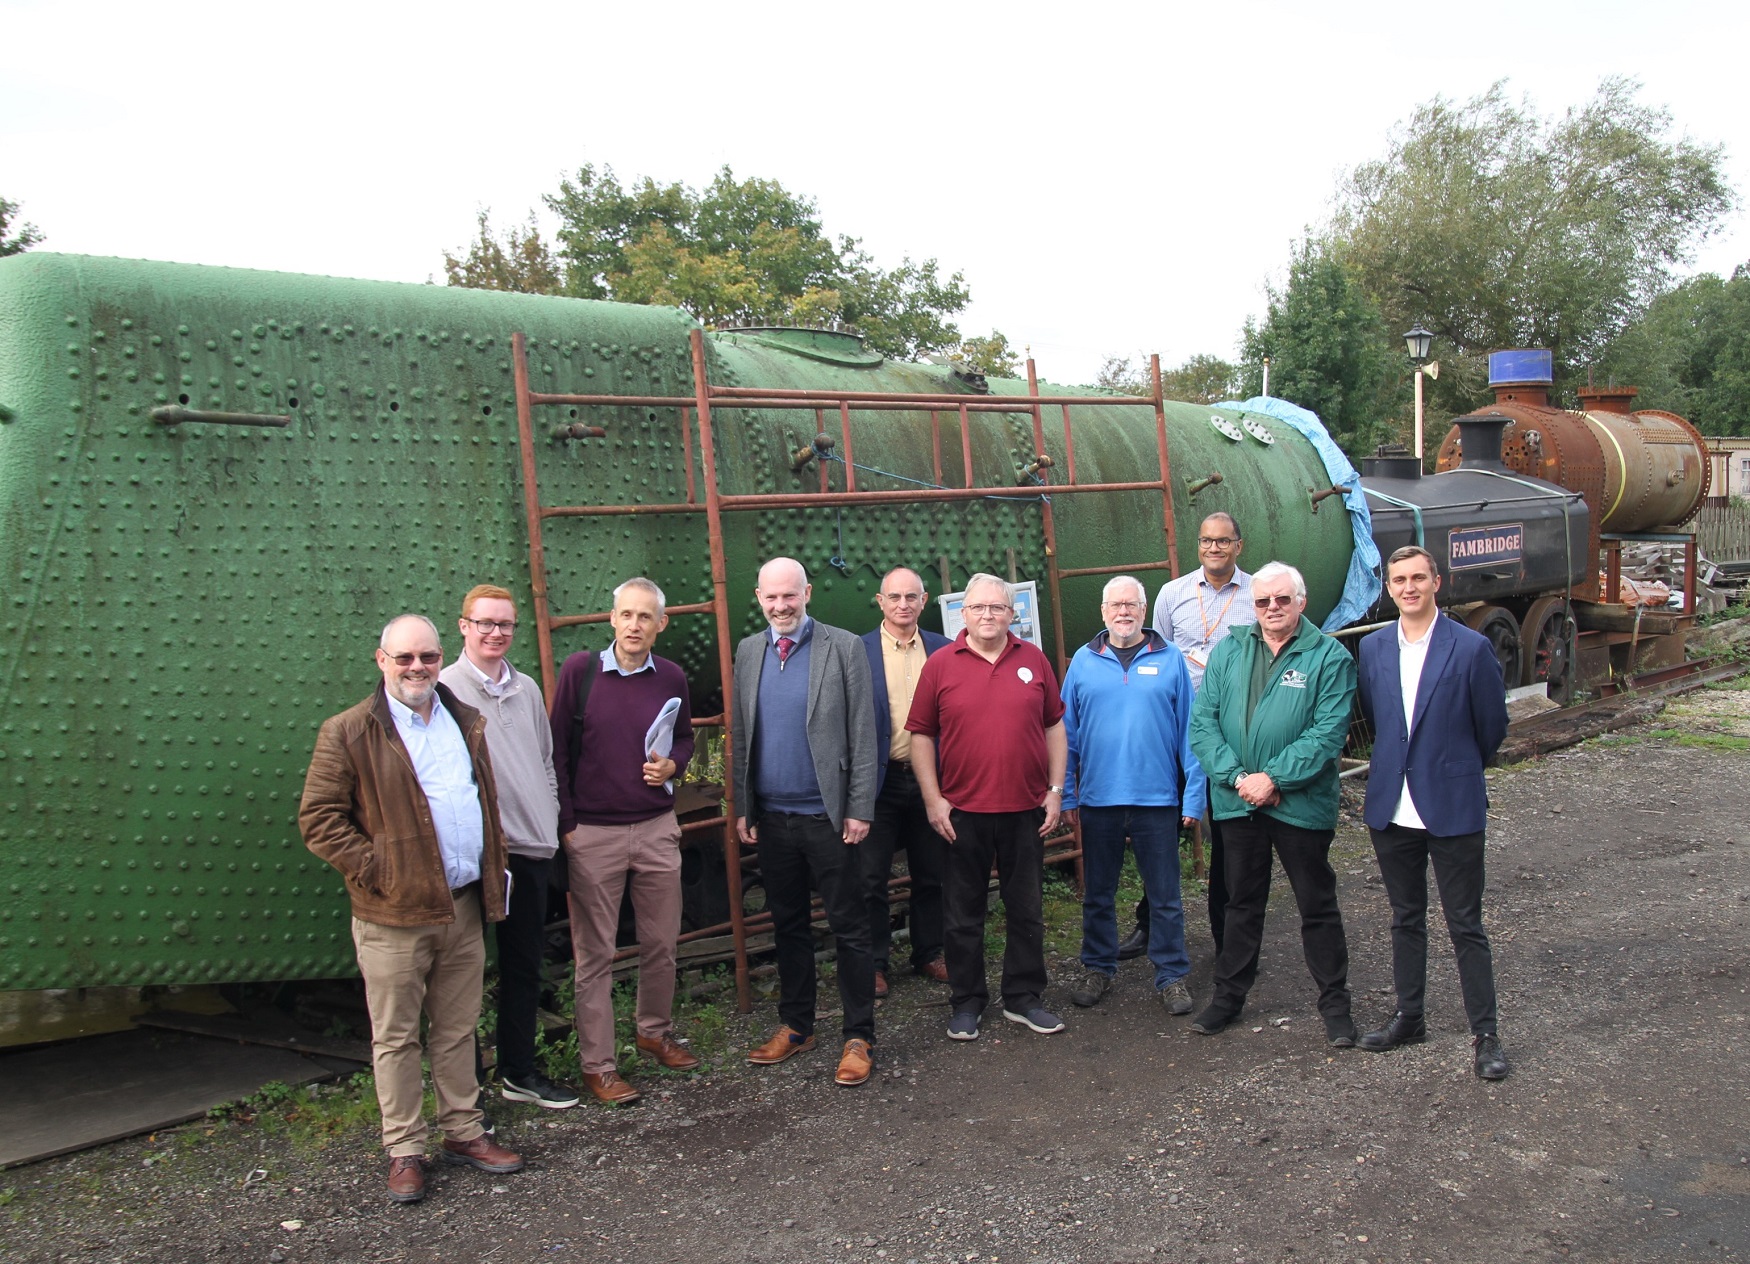 Justin Meets Swindon and Cricklade Railway To Discuss Exciting New Plans